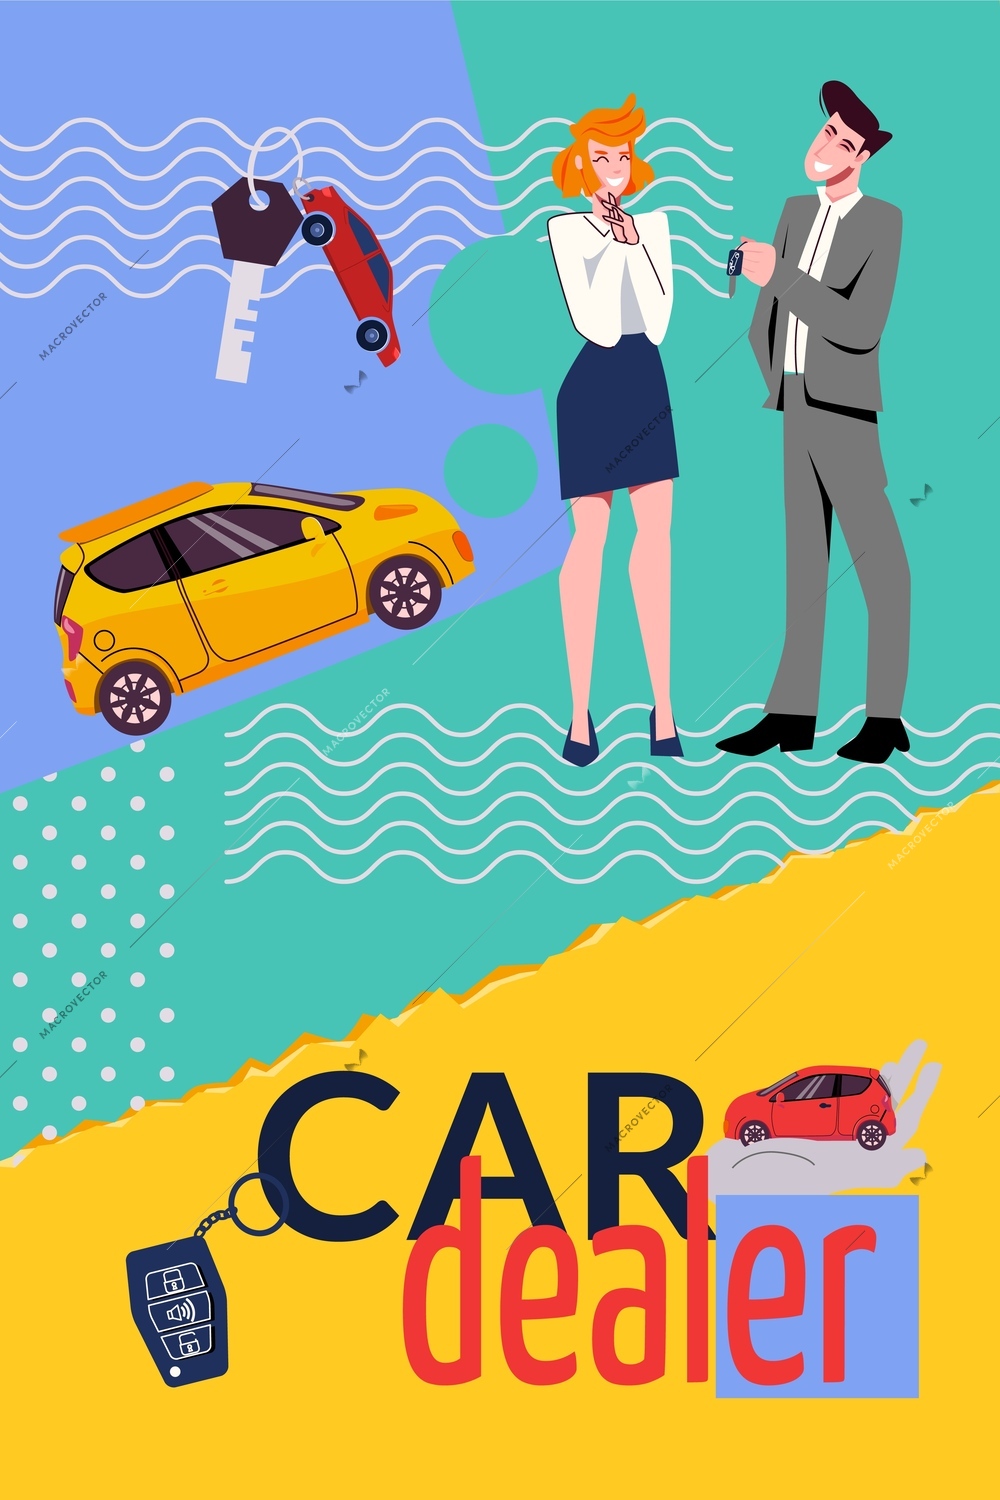 Car dealer vertical collage in flat style with new car key and happy characters of seller and customer on colorful background vector illustration